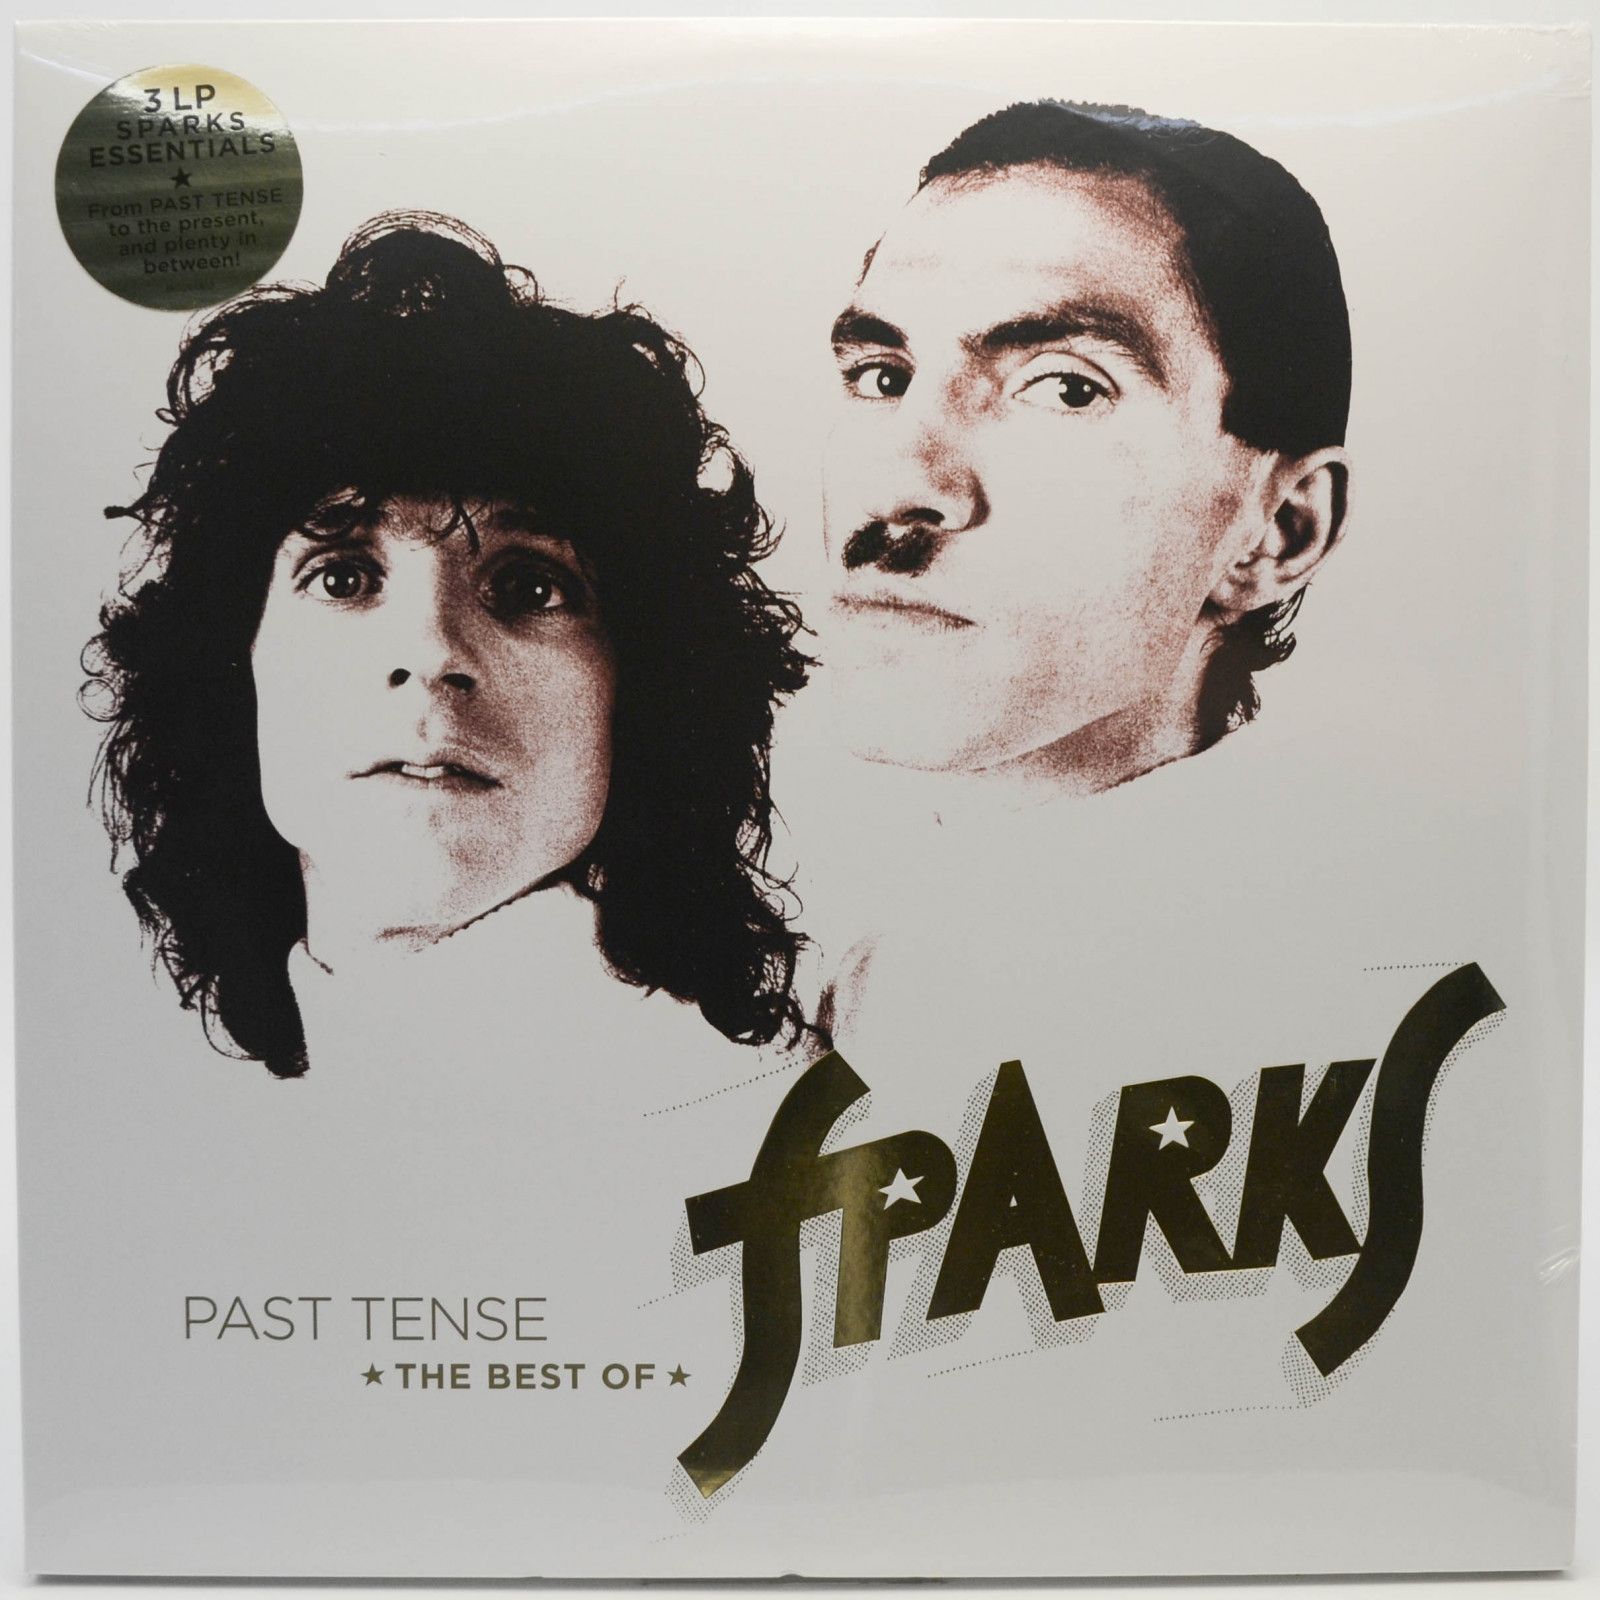 Sparks — Past Tense (The Best Of Sparks) (3LP), 2019